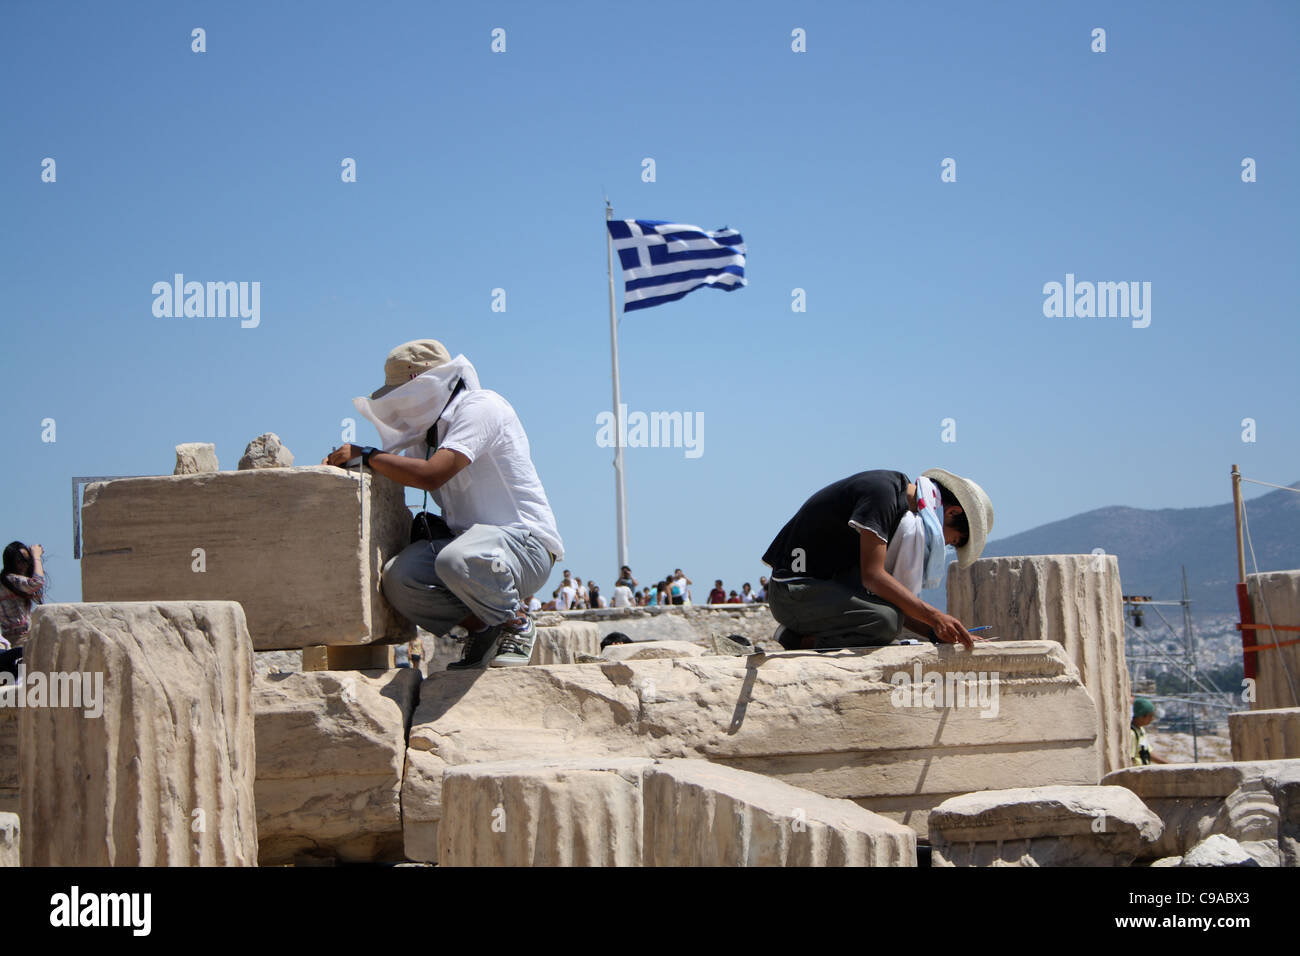 Two archaeologists excavating the Acropolis, with the Greek flag in the middle at a distance. Stock Photo